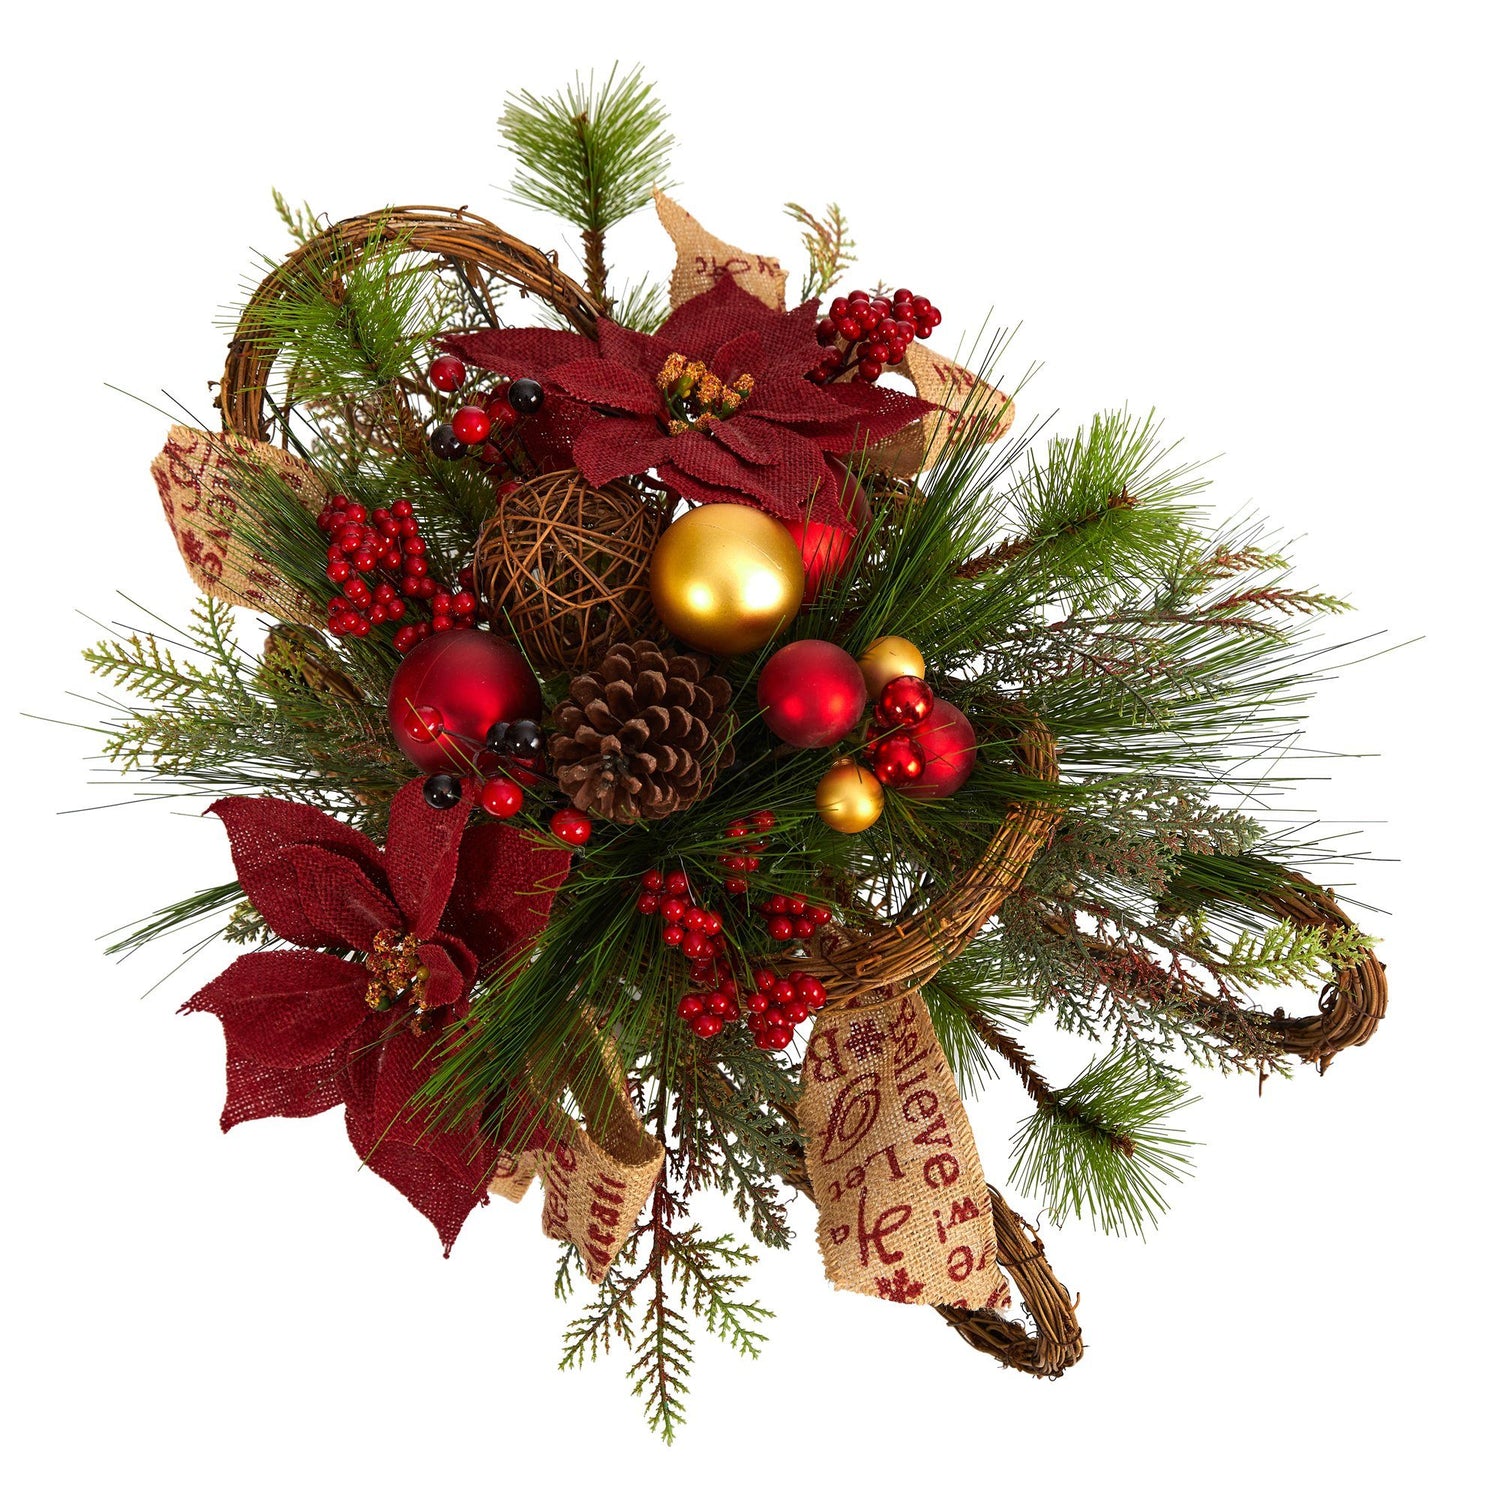 18” Christmas Sleigh with Poinsettia, Berries and Pinecone Artificial Arrangement with Ornaments